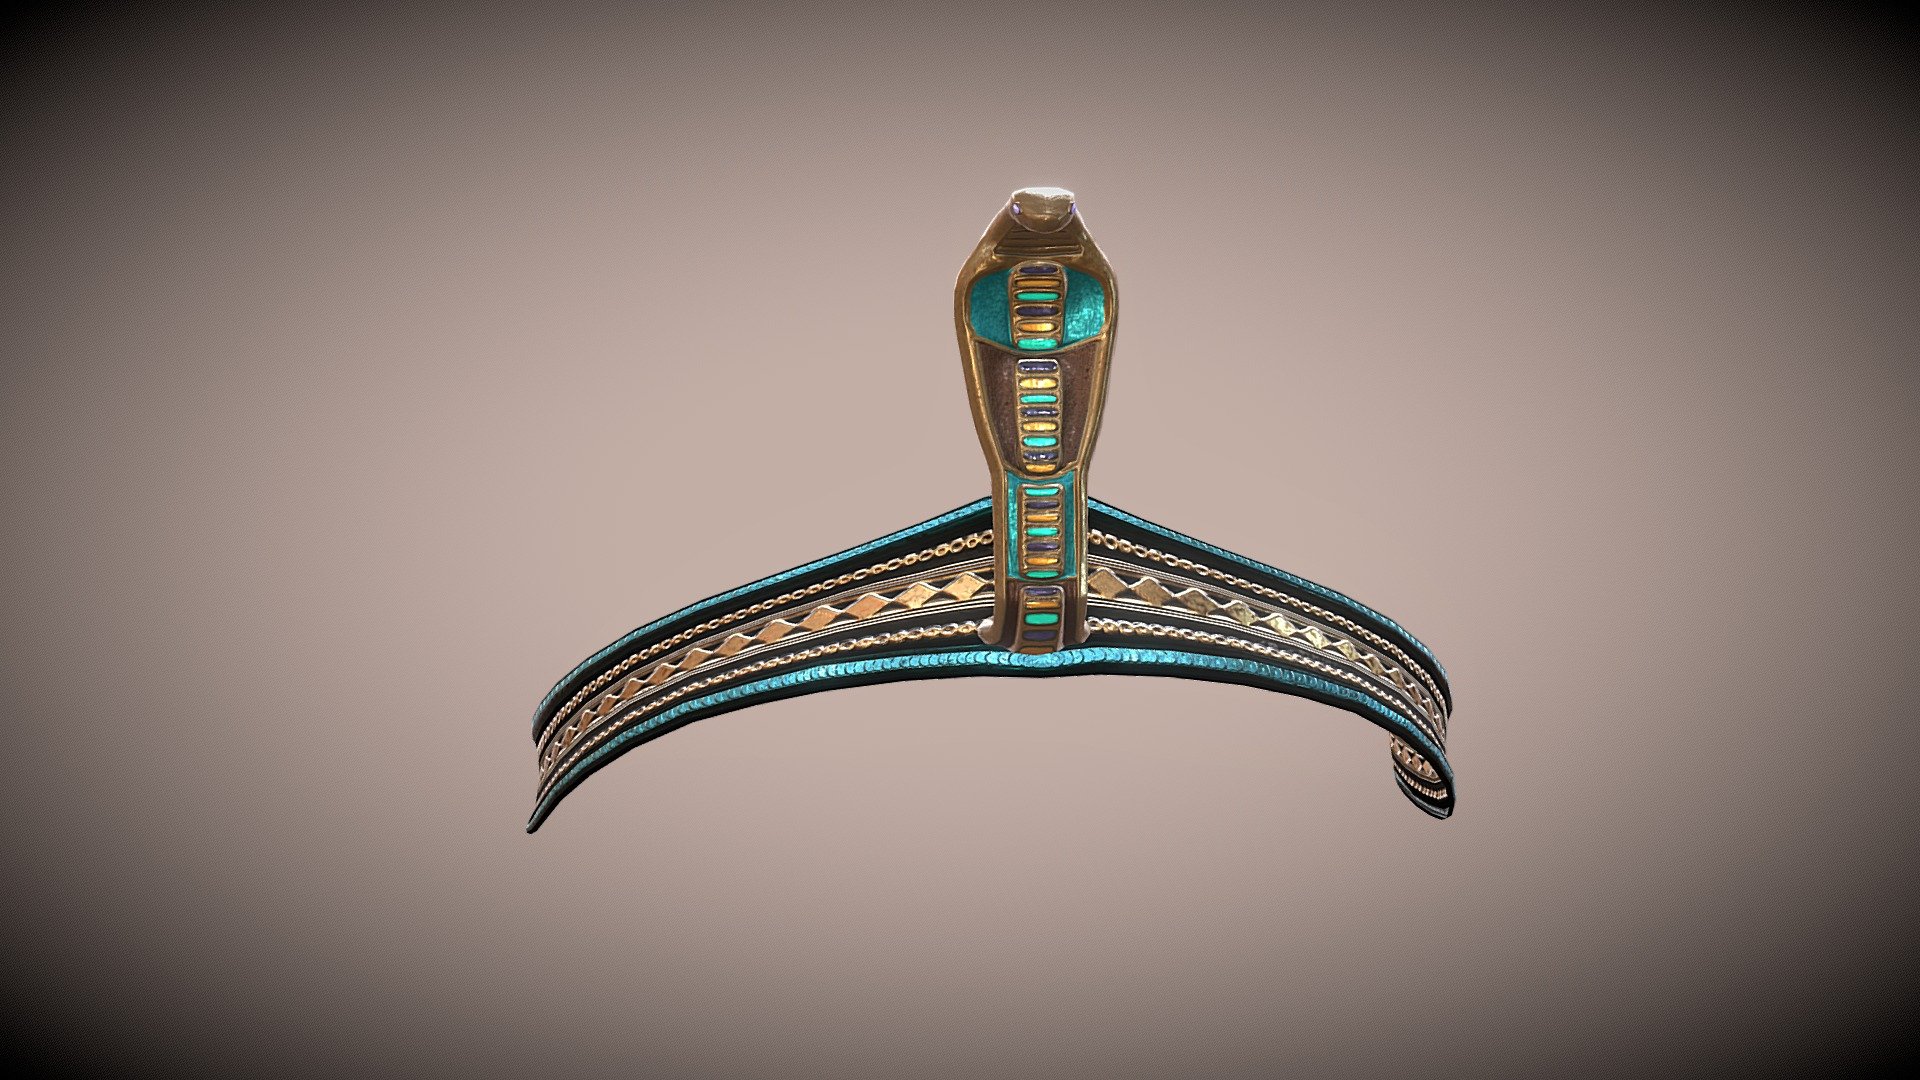 Here is a fantasy ancient Egyptian crown, very loosely based on representations of crowns on Egyptian royal sarcophagi. It is all pretty simple, since it is meant to go with a full character 3d model